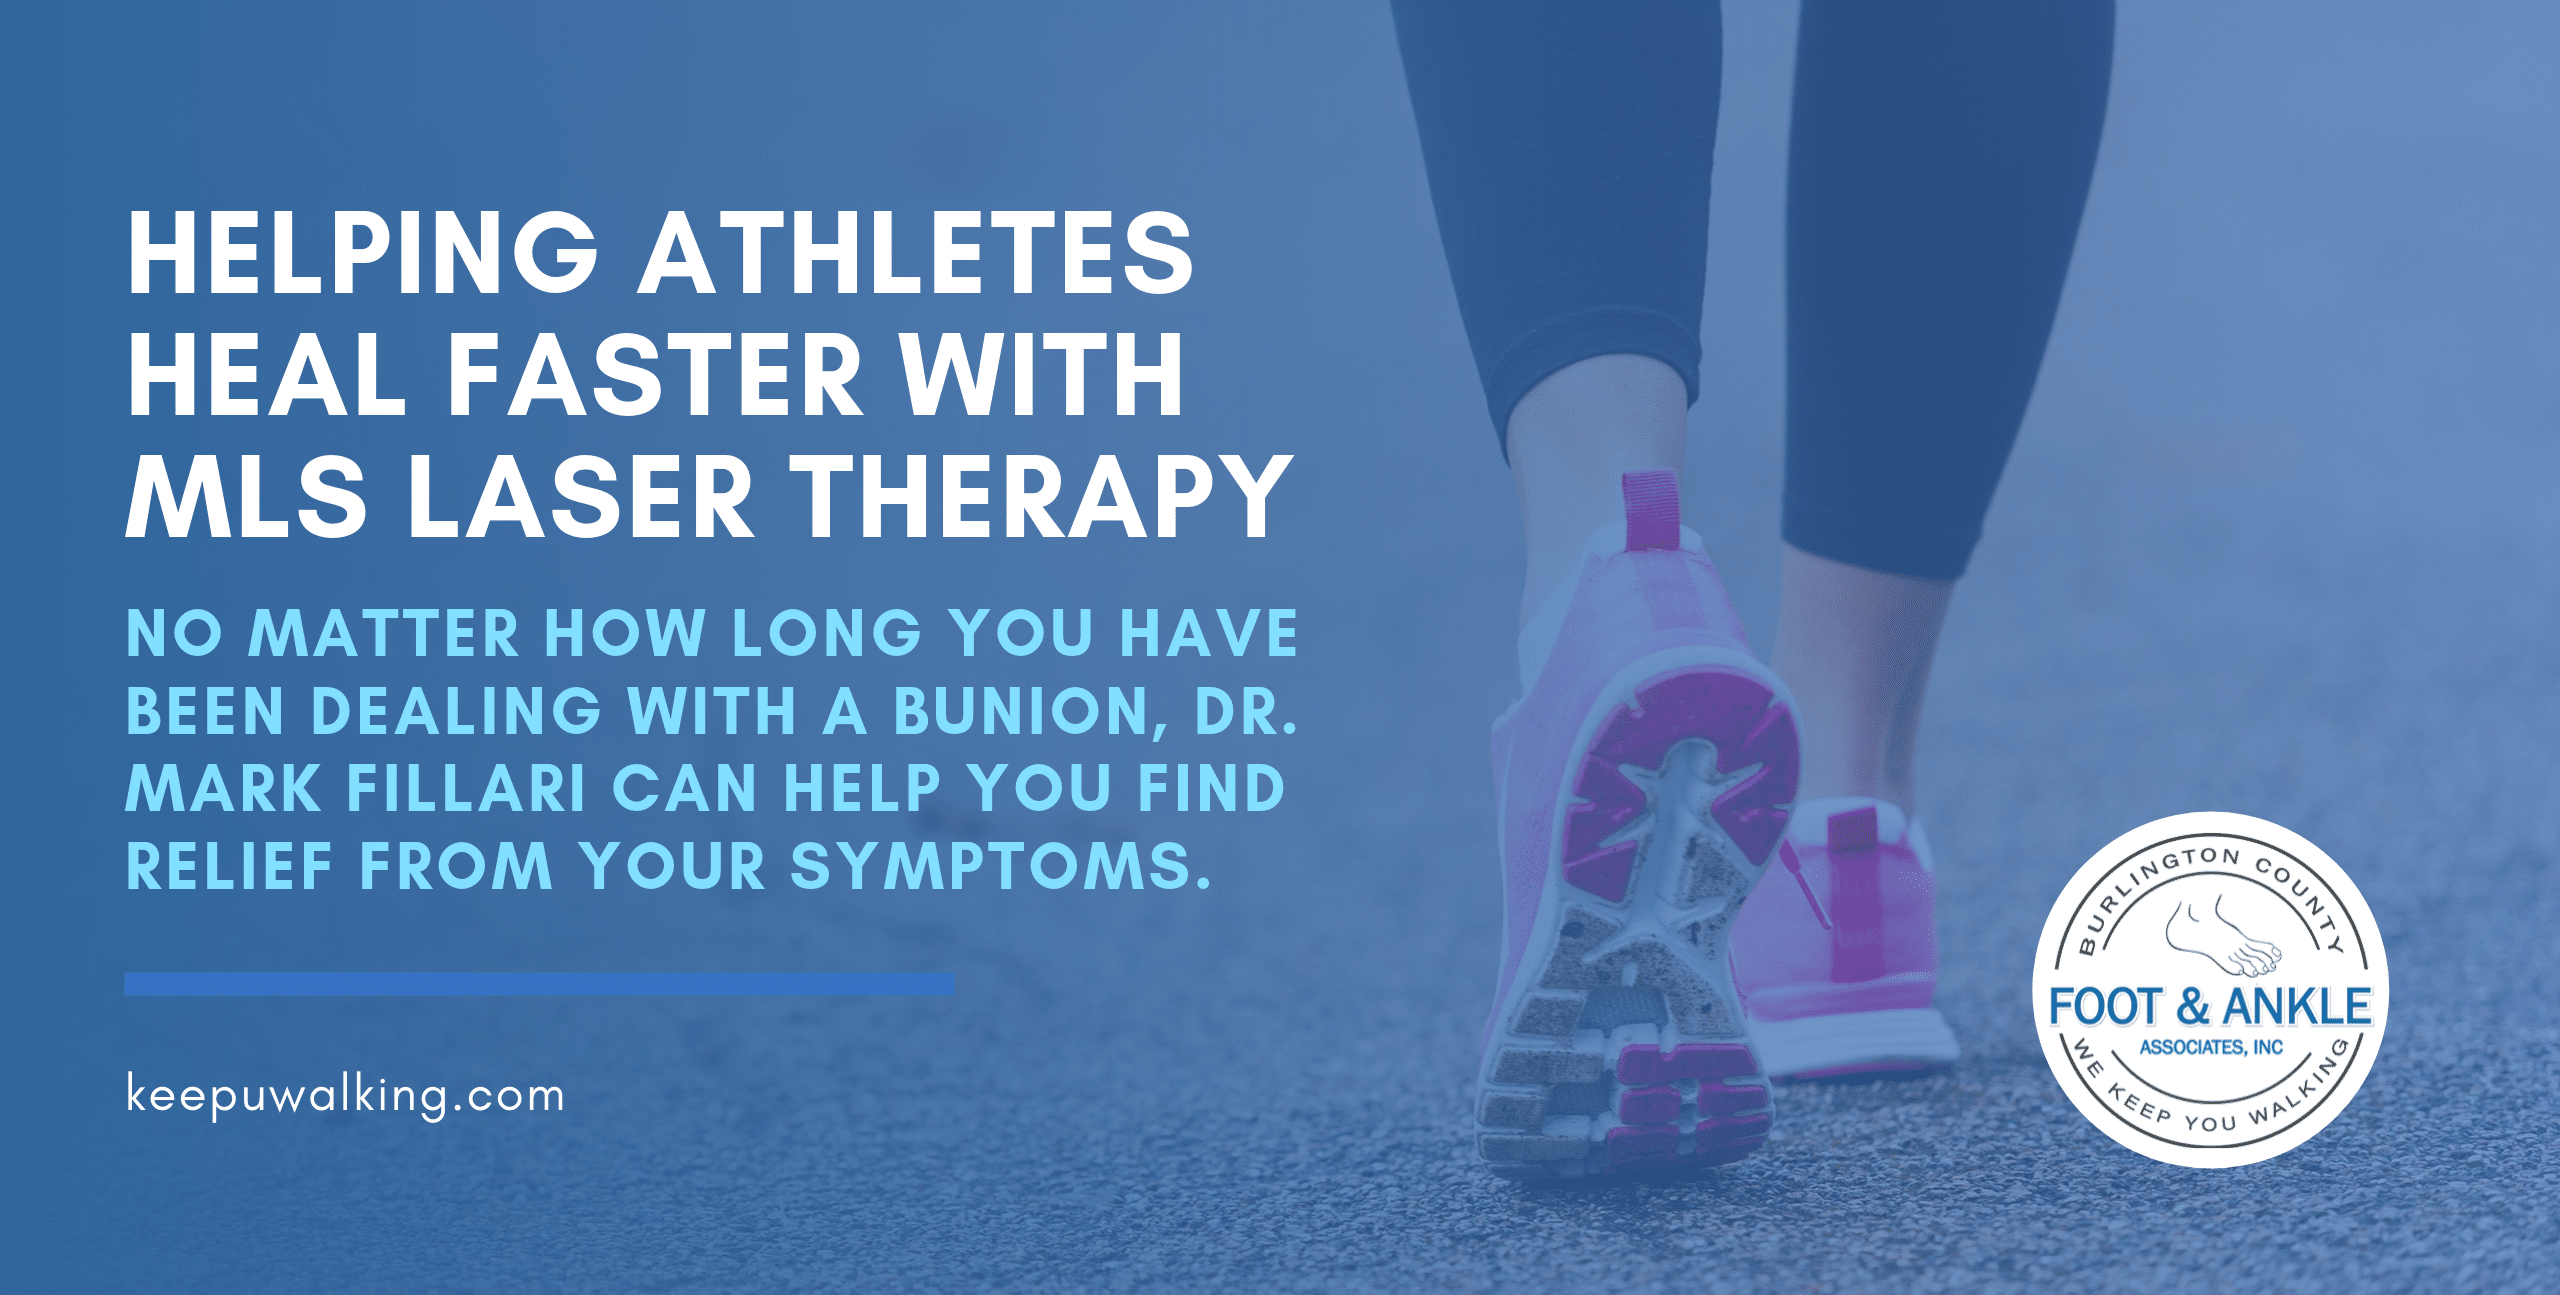 MLS Laser Therapy for Athletes